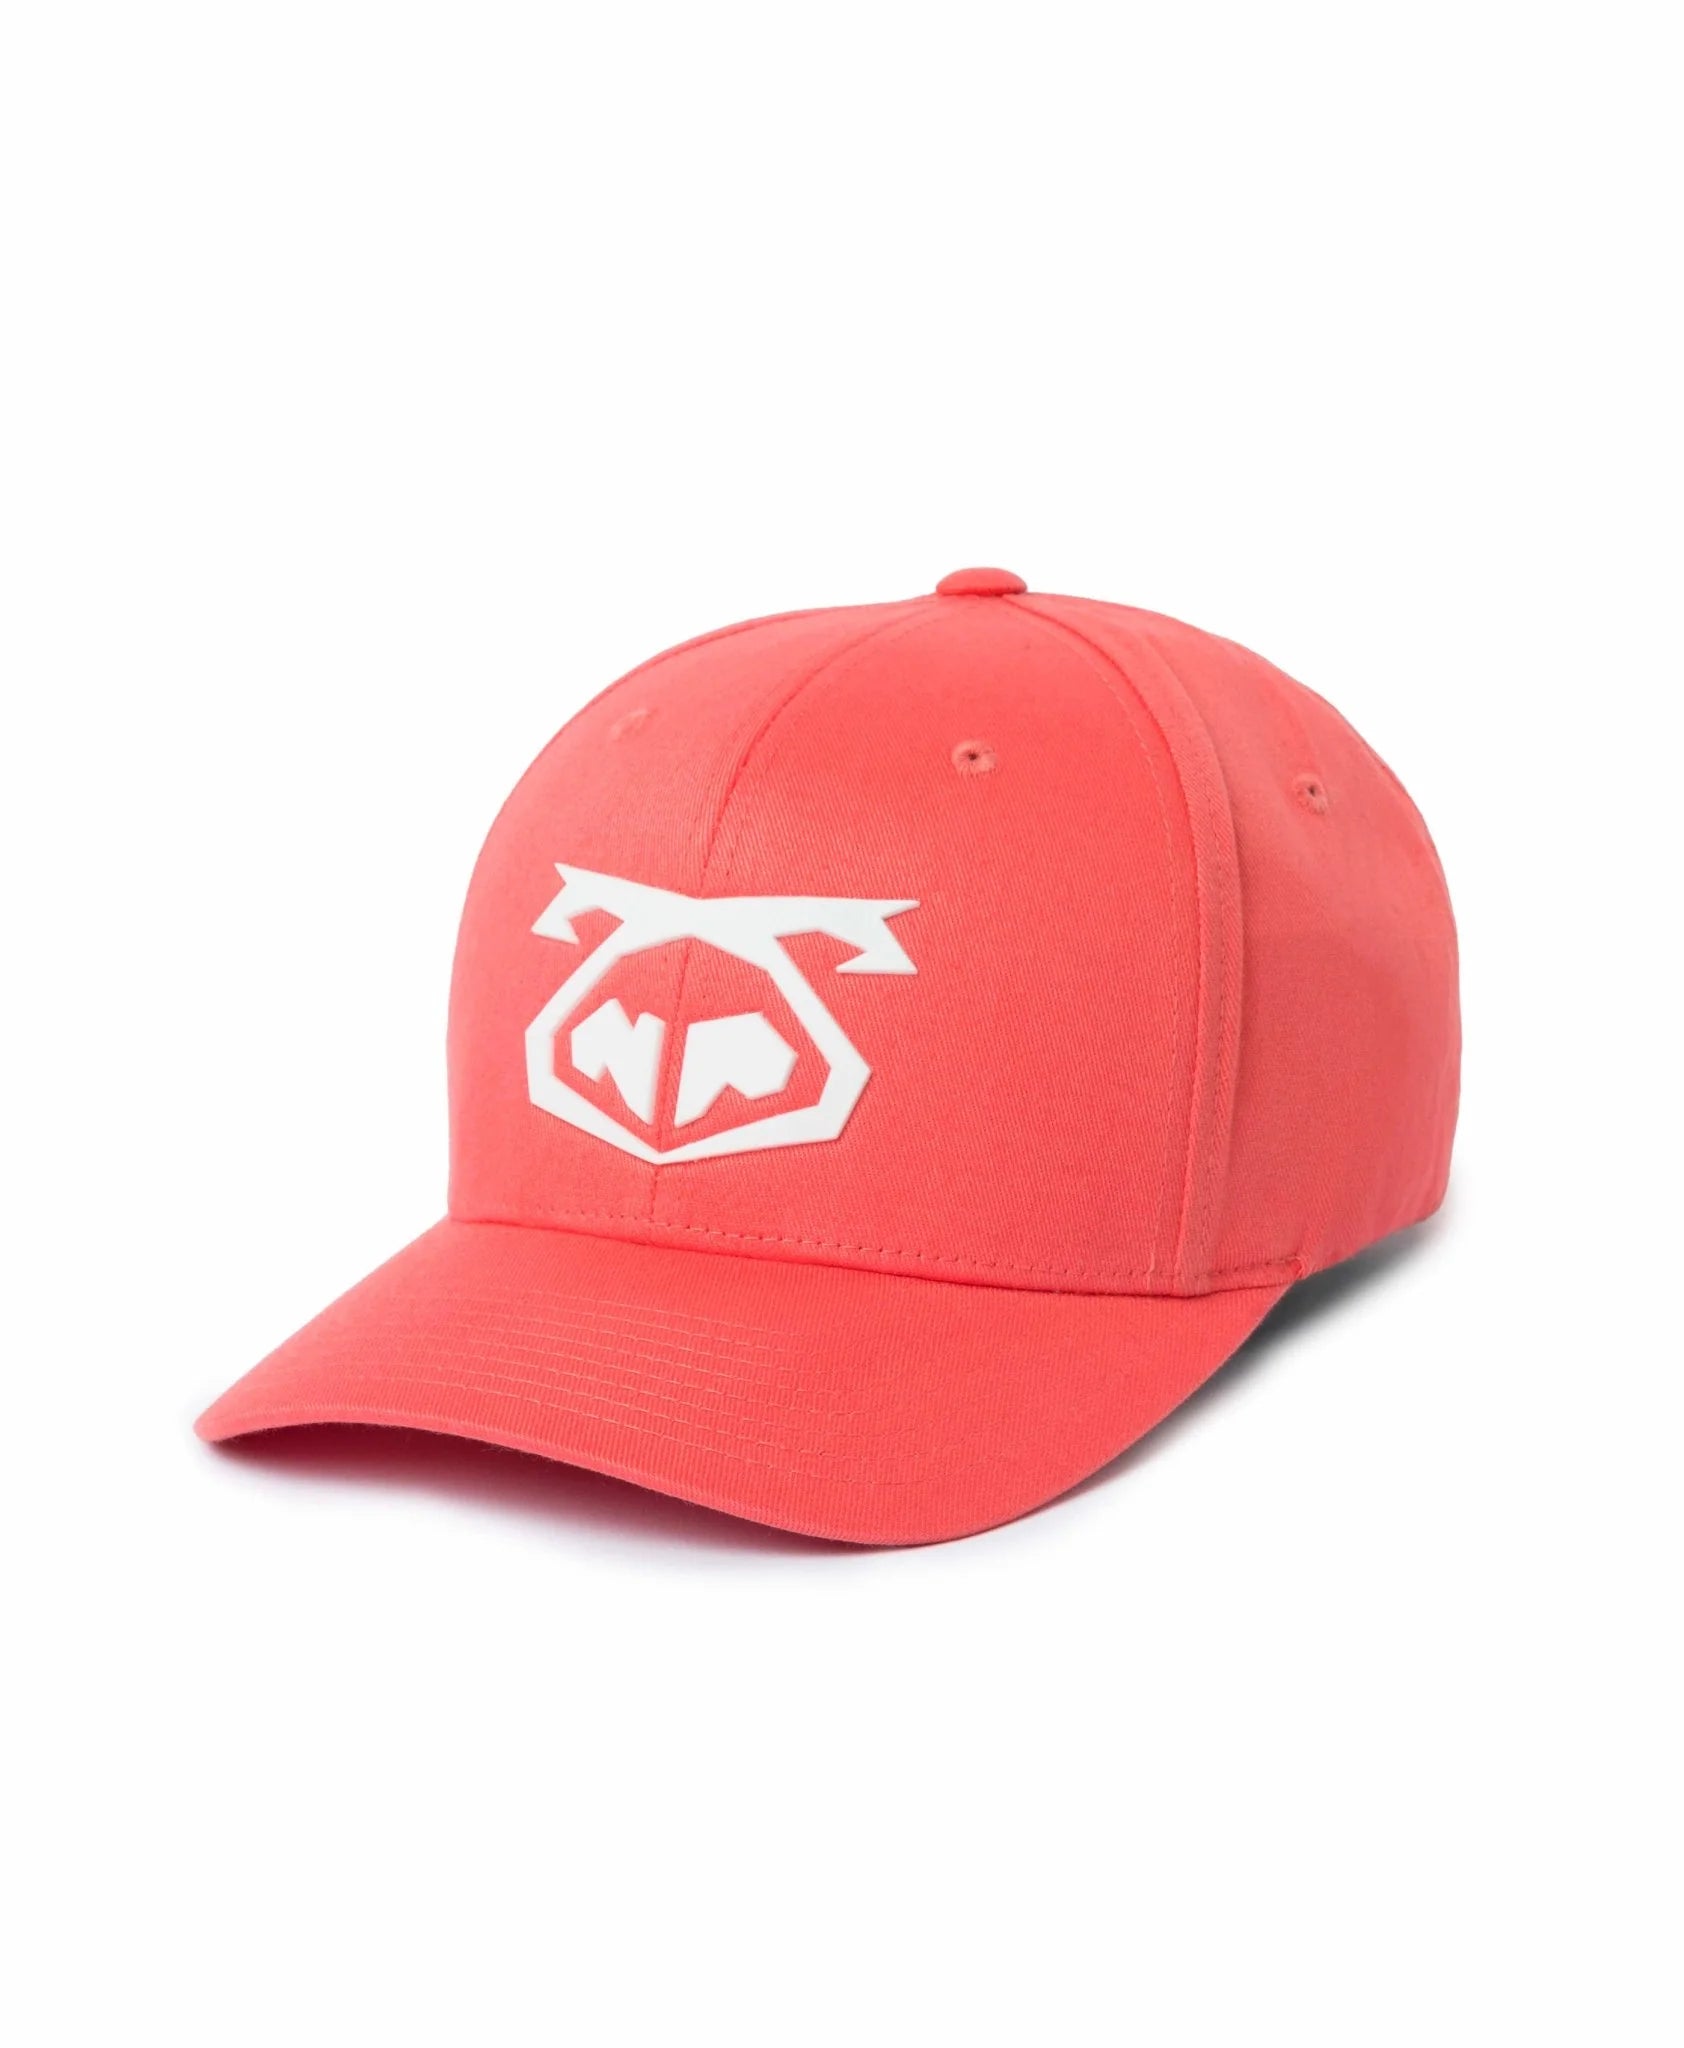 Nasty Pig Snout Cap Coral/White